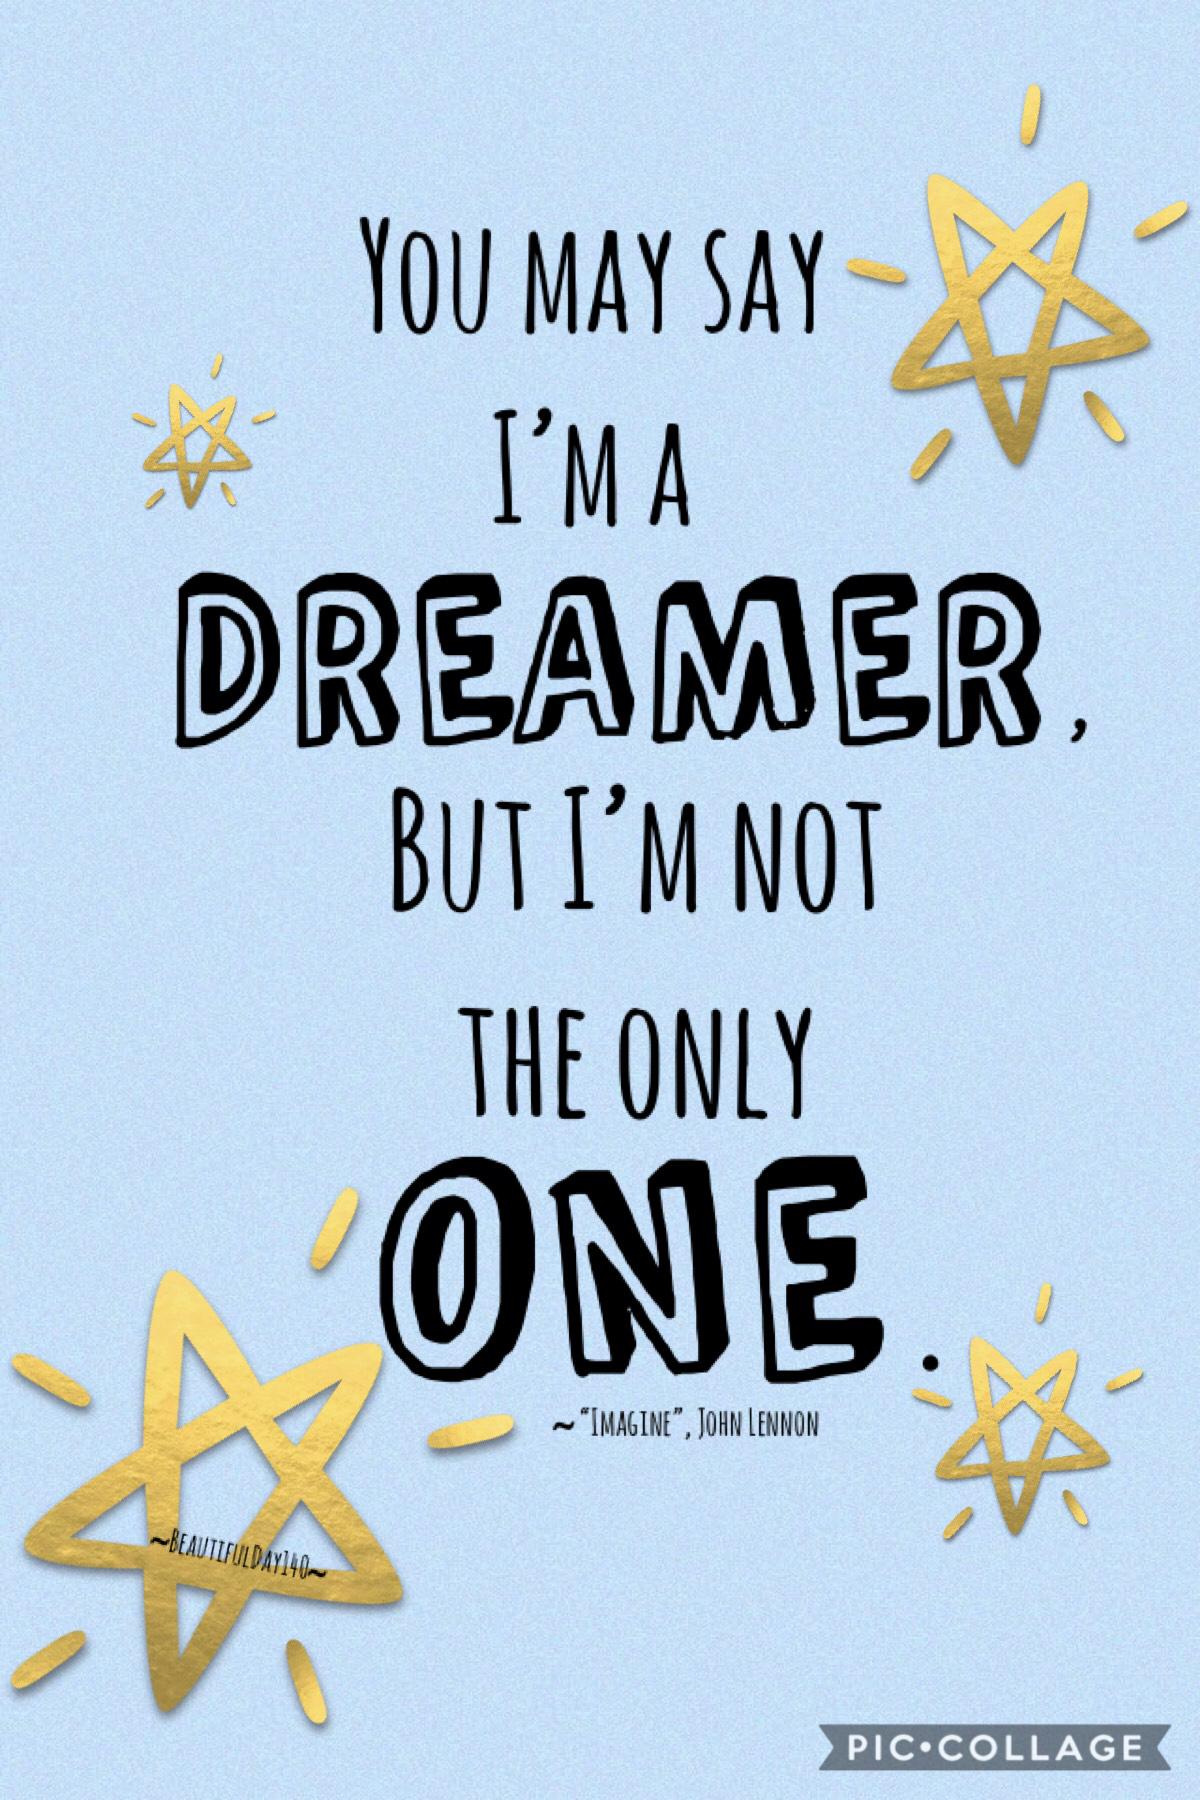 6/24/18
Hey guys!! Happy summer!🎉 I hope you guys enjoy this quote from a song called “Imagine” by an incredibly talented musician named John Lennon. I think this quote is very inspiring bc we ALL have dreams☺️ Have a great day!❤️